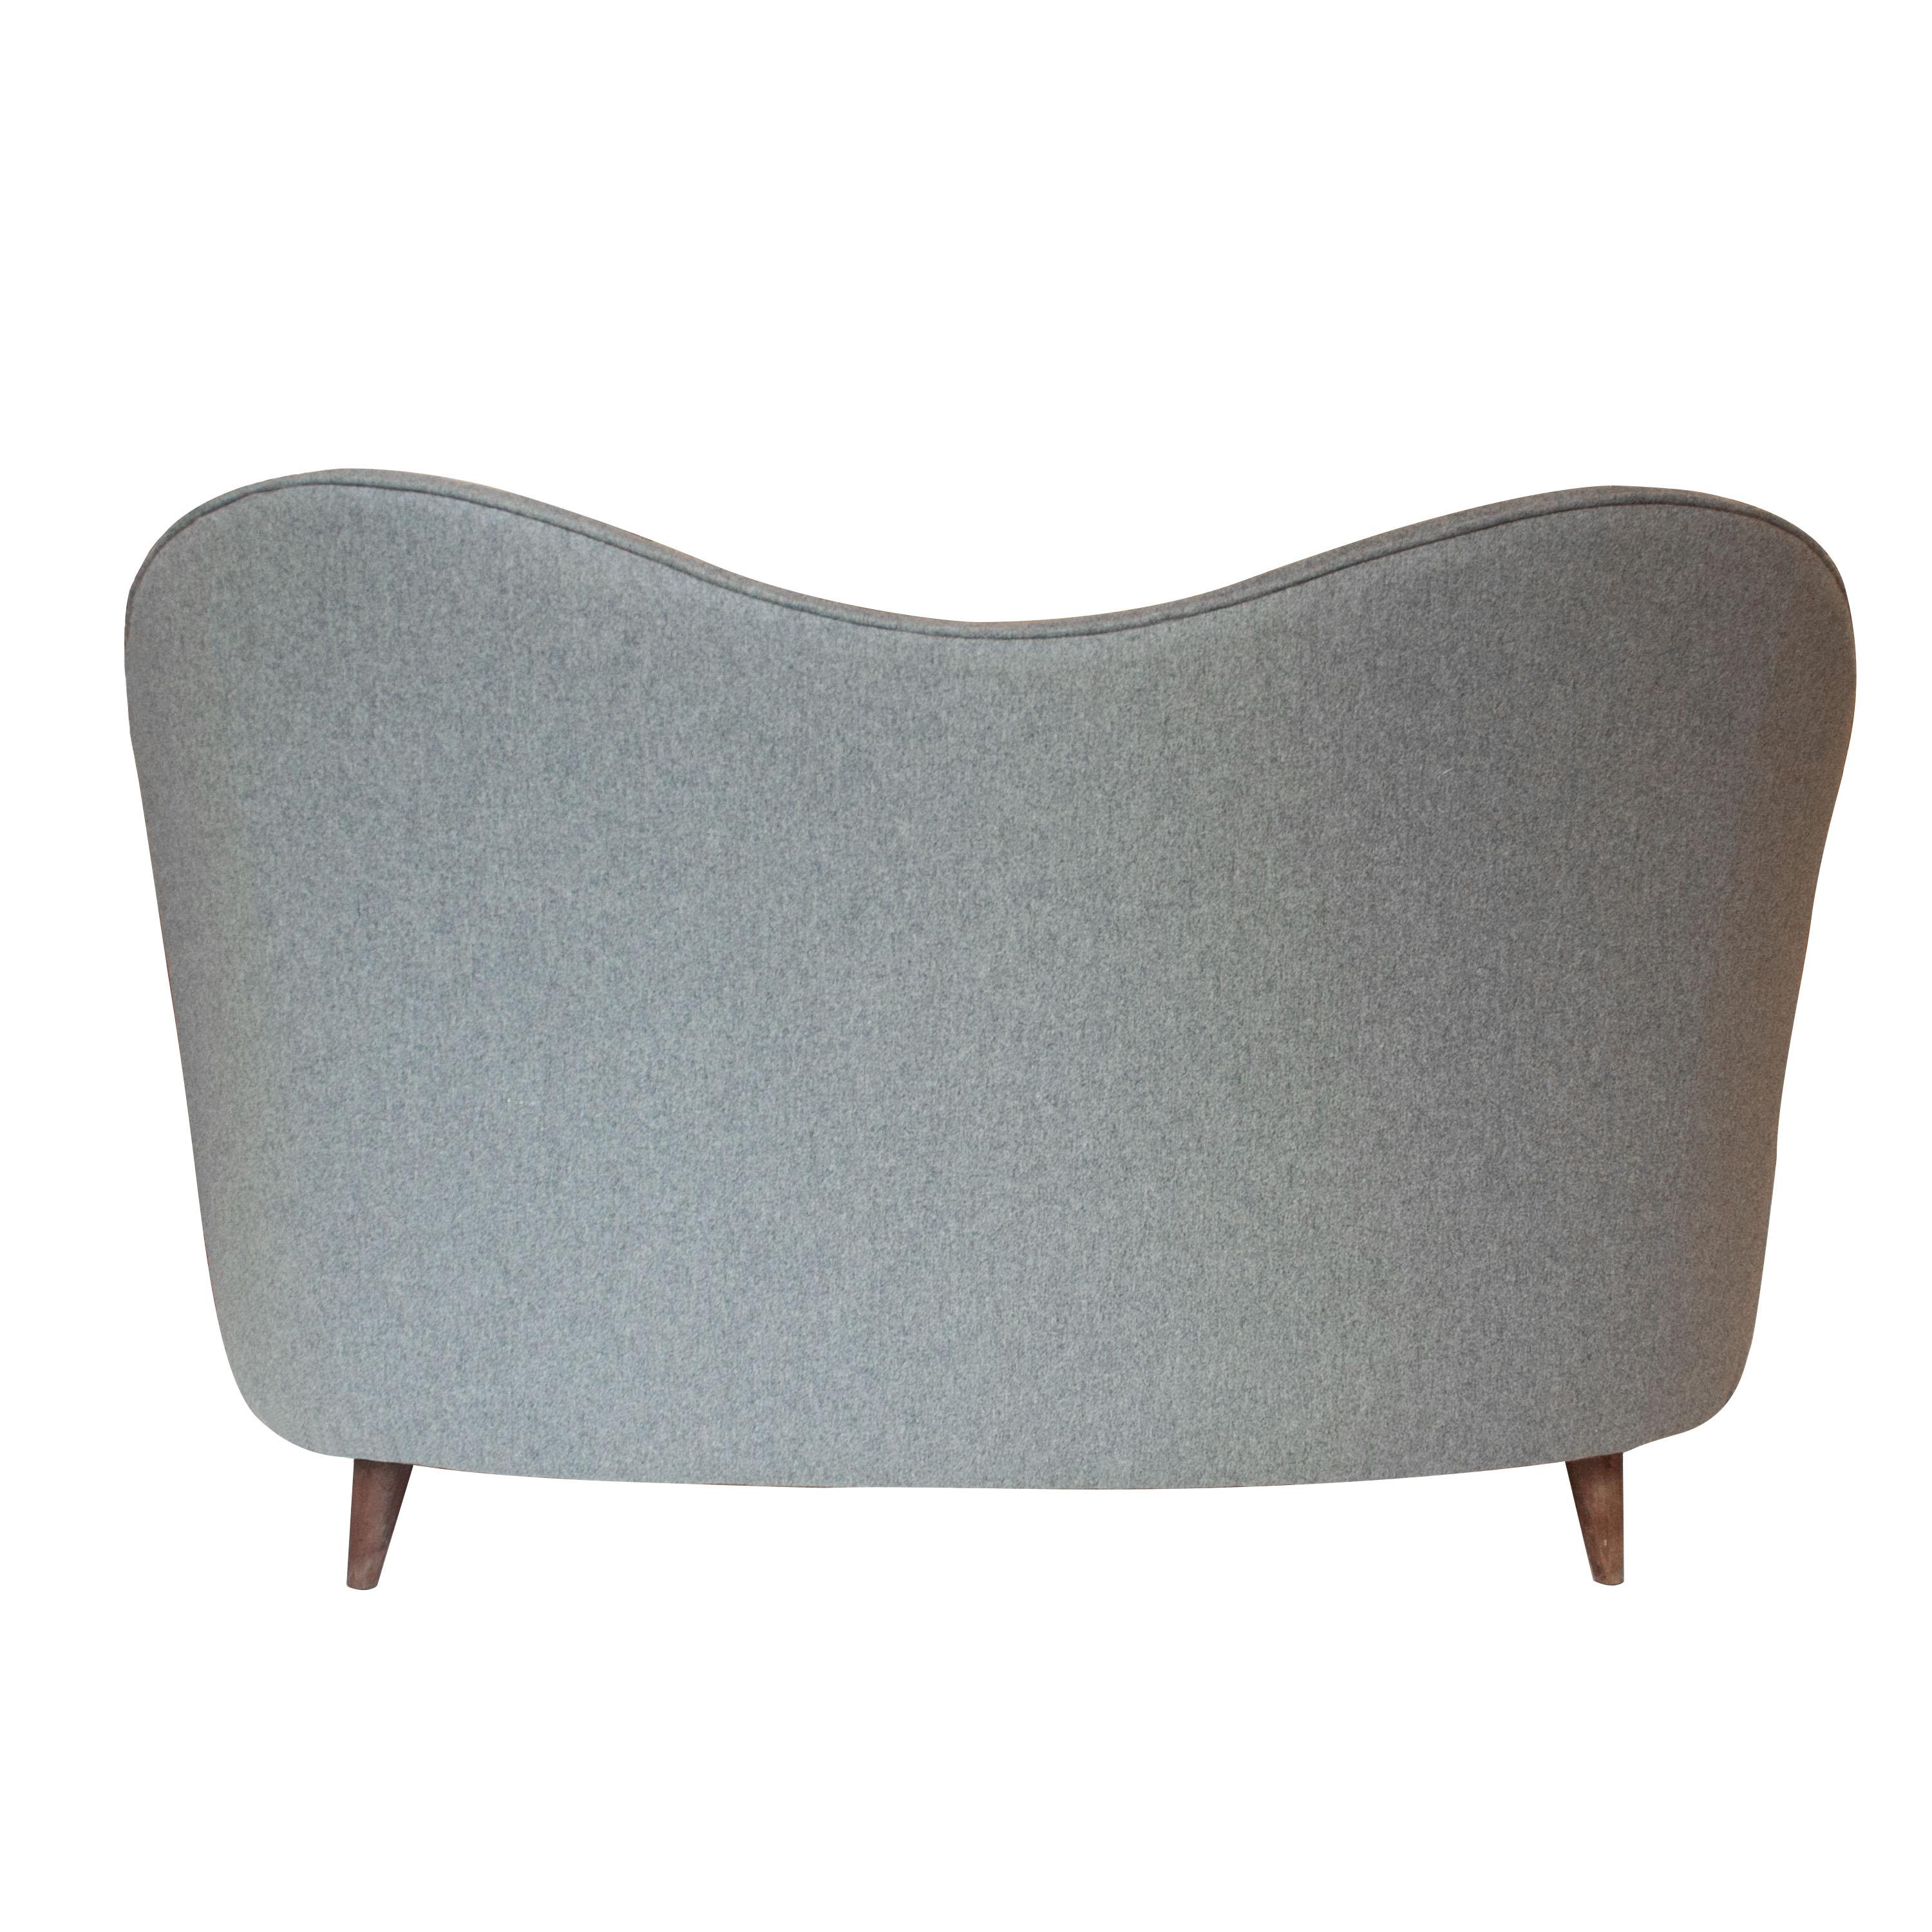 Finn Juhl Attributed Grey Wool Felt Pair of Two Seat Sofas, Italy, 1950 In Good Condition For Sale In Madrid, ES